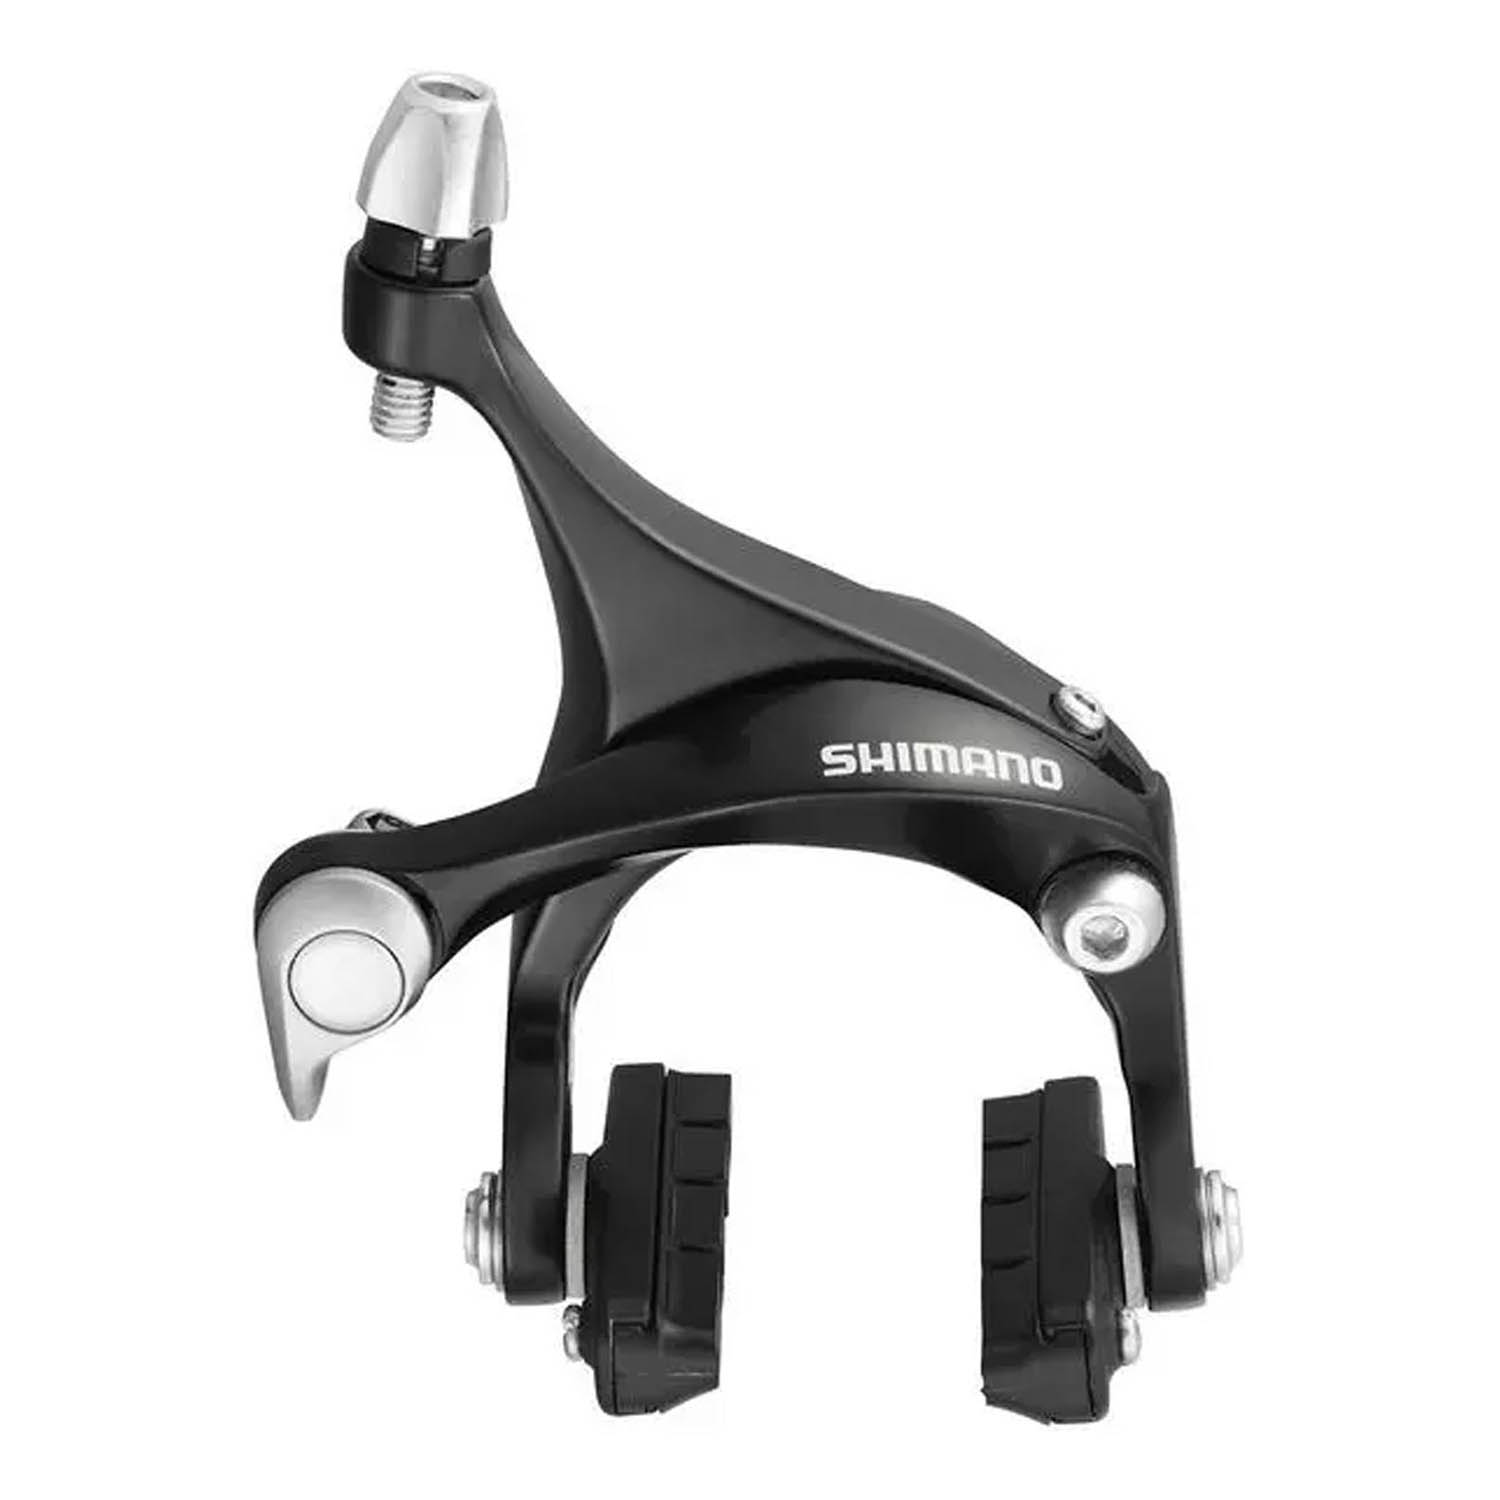 Shimano remhoef Non-group